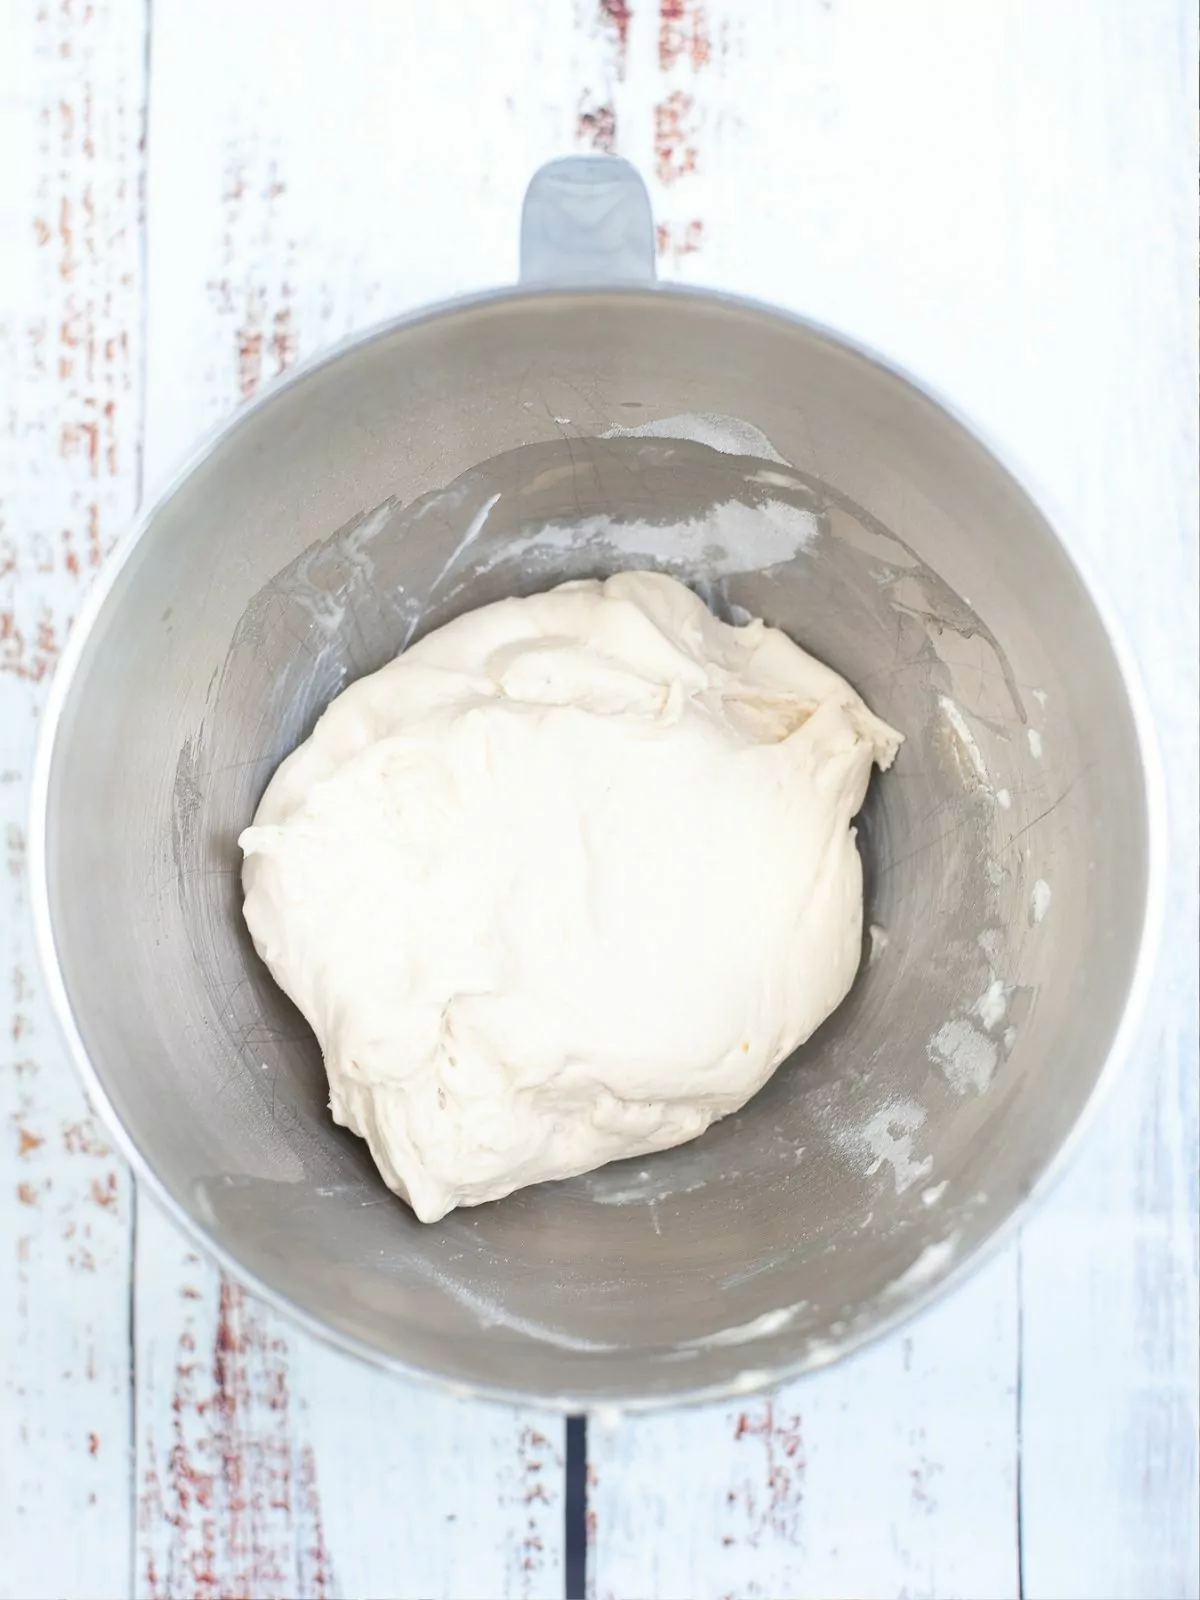 Flatbread dough combined in mixing bowl.